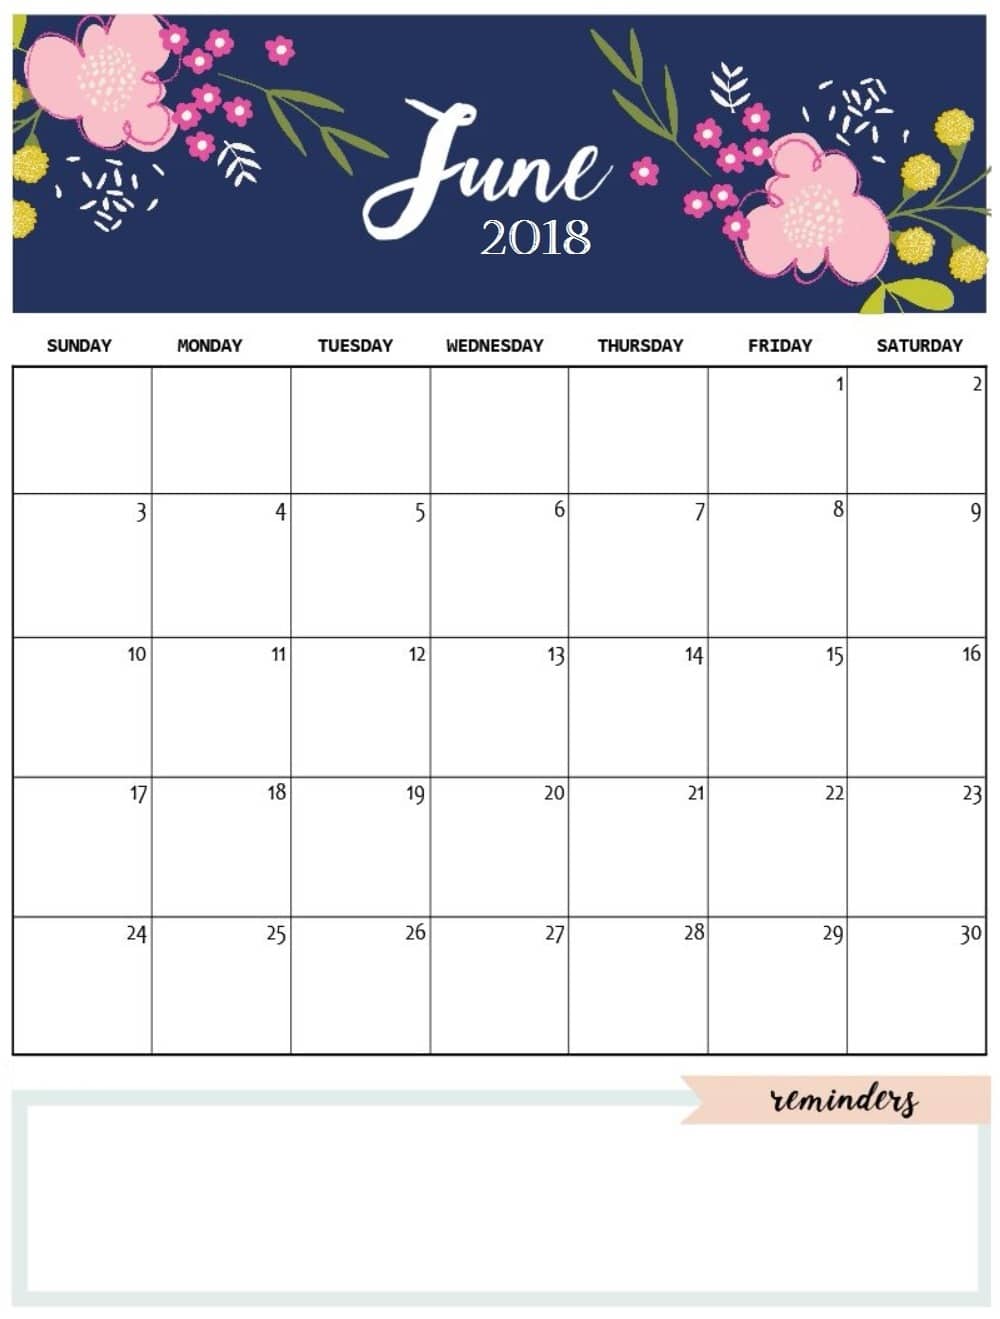 June 2018 Calendar Table Quote Images HD Free